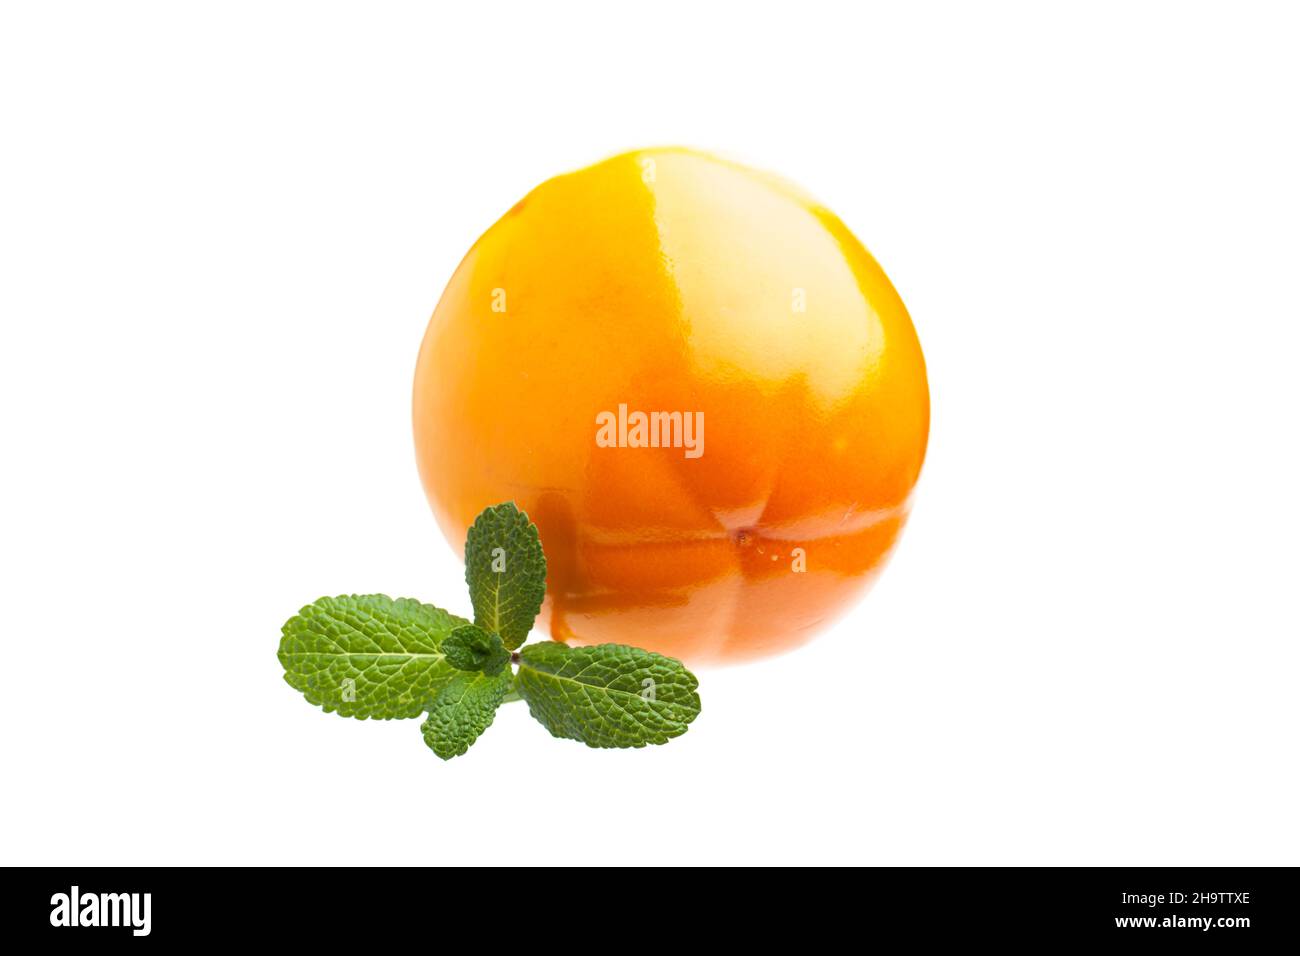 persimmons, sweet, orange, smooth, fruit, tannin, kaki, mint, leaf, green, white, background, isolated, shadow, a, whole, fresh, details, food, fruity Stock Photo